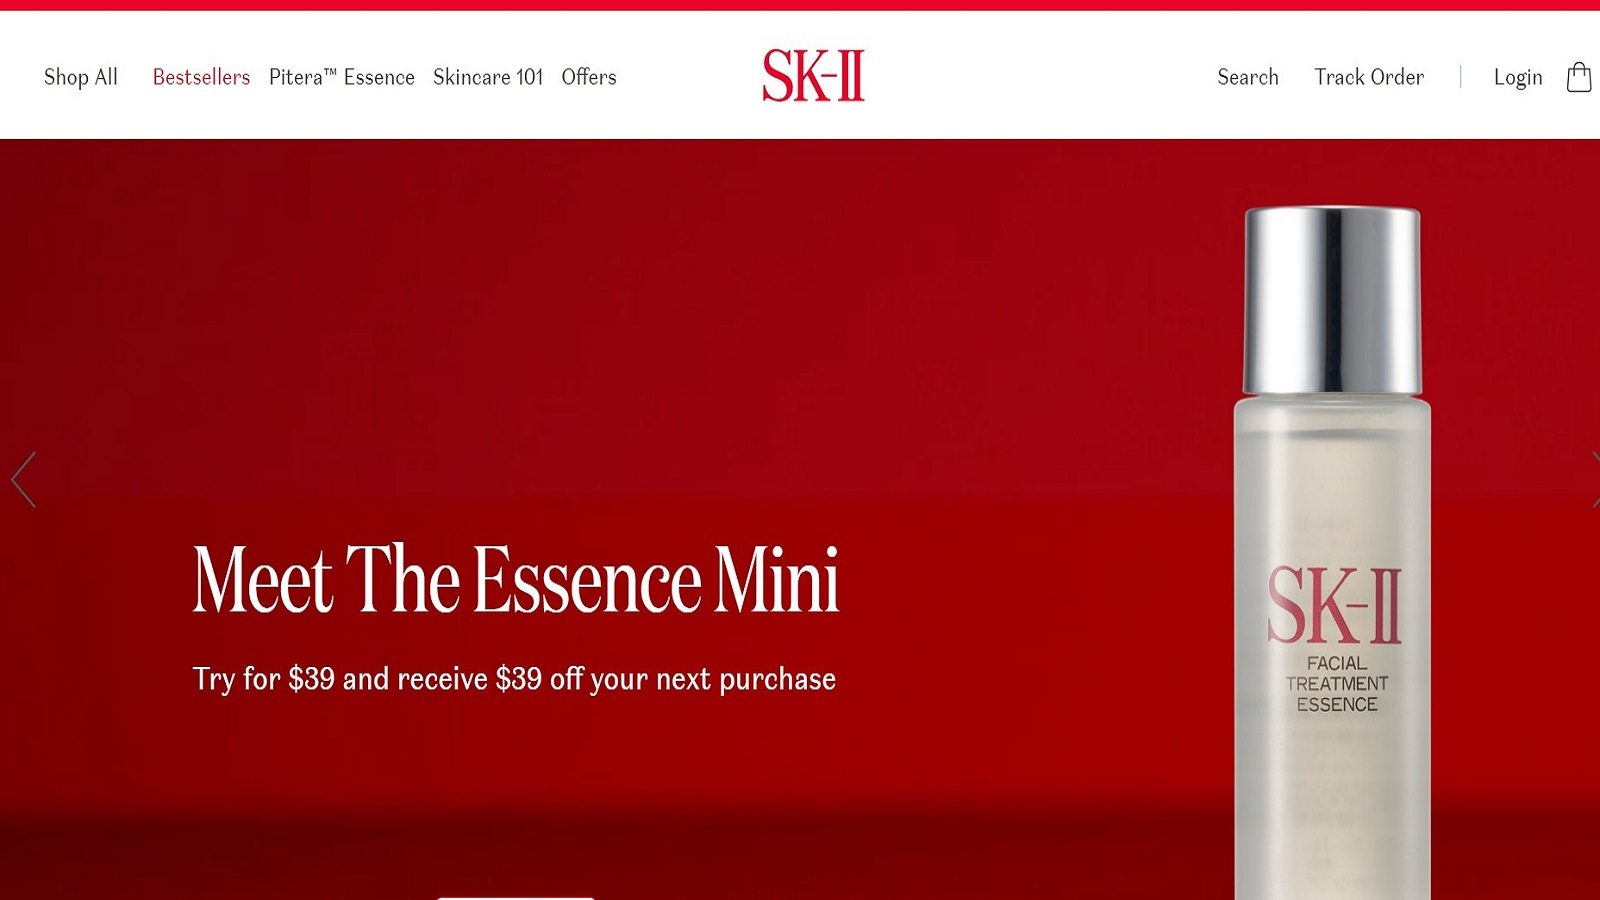 SK-II Facial Treatment Essence Review: Does It Really Work?